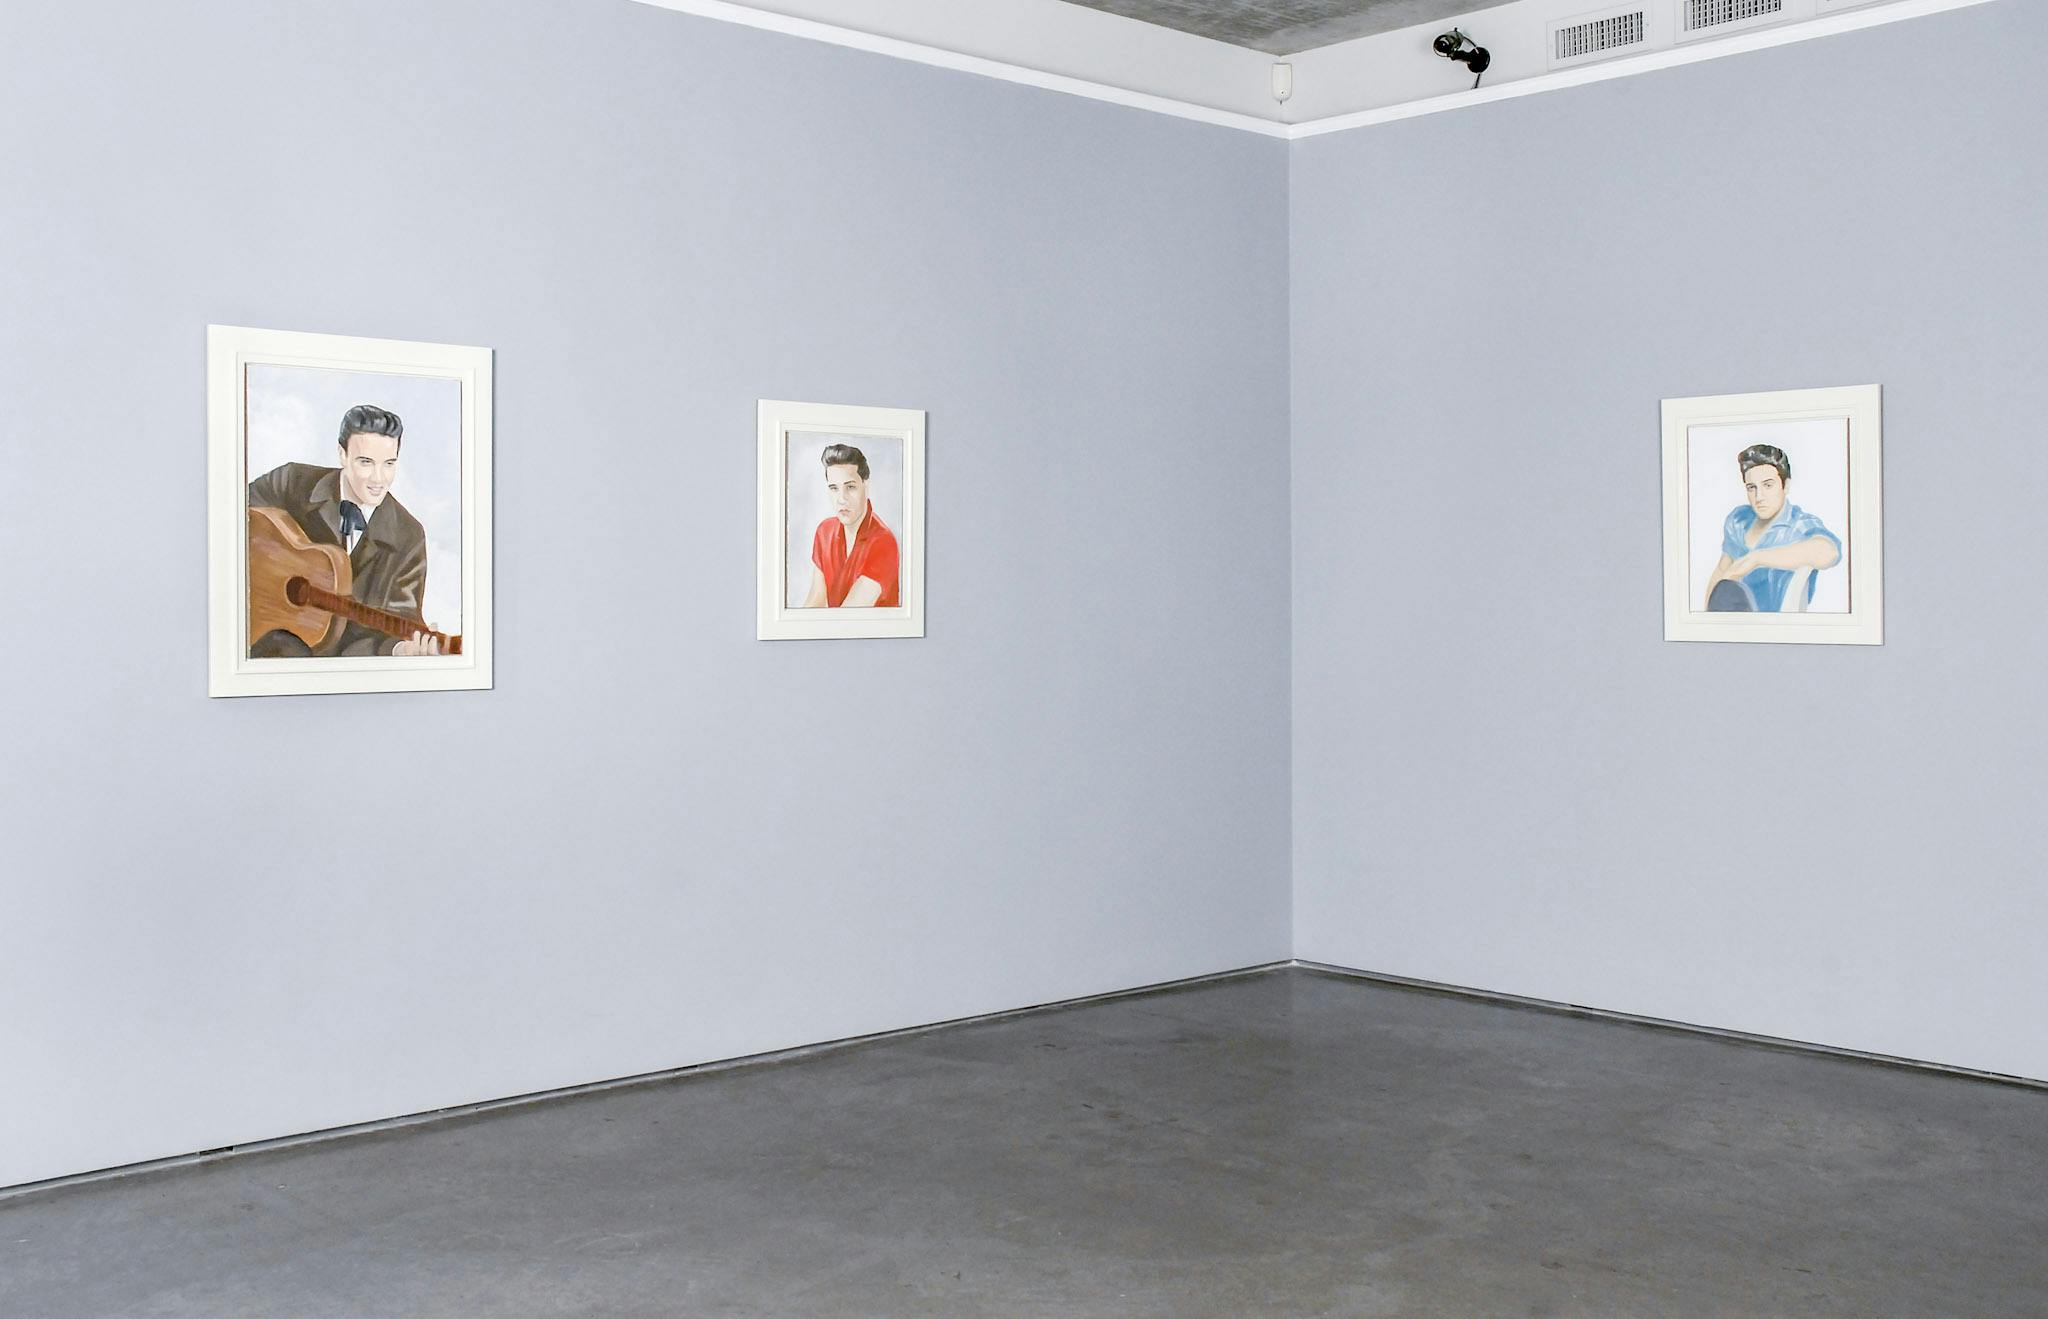 Three portrait drawings are mounted on the gallery walls. They are coloured drawings, and each depicted man wears different coloured shirts. One of those depicted men is holding a guitar. 